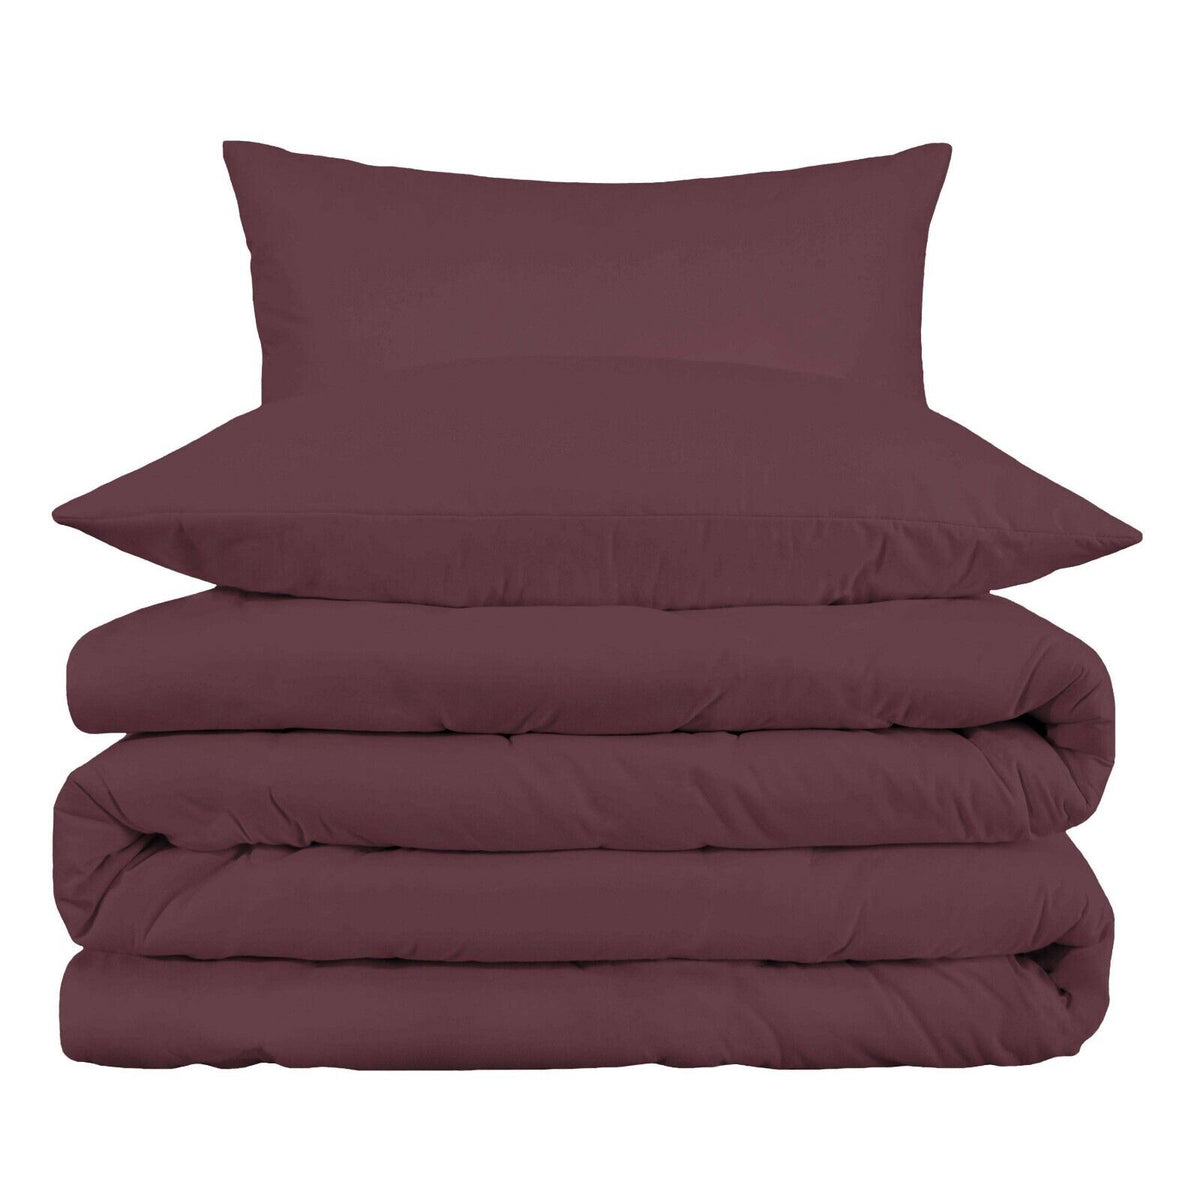 Superior Egyptian Cotton Solid All-Season Duvet Cover Set with Button Closure - Plum